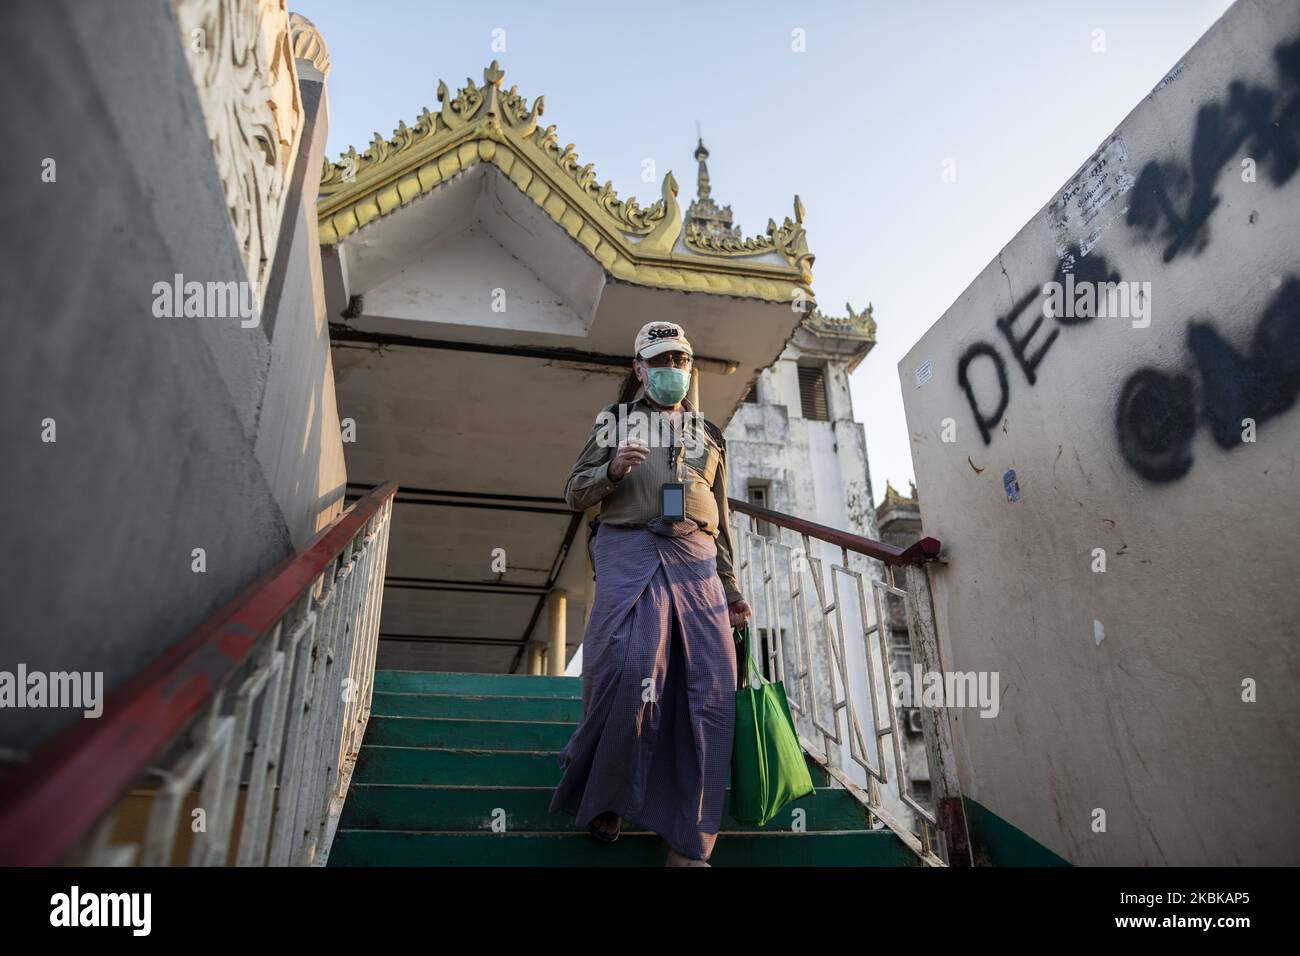 A man wearing face mask, amid concerns of the COVID-19 coronavirus, walks down the ladder in Yangon on March 21, 2020. (Photo by Shwe Paw Mya Tin/NurPhoto) Stock Photo